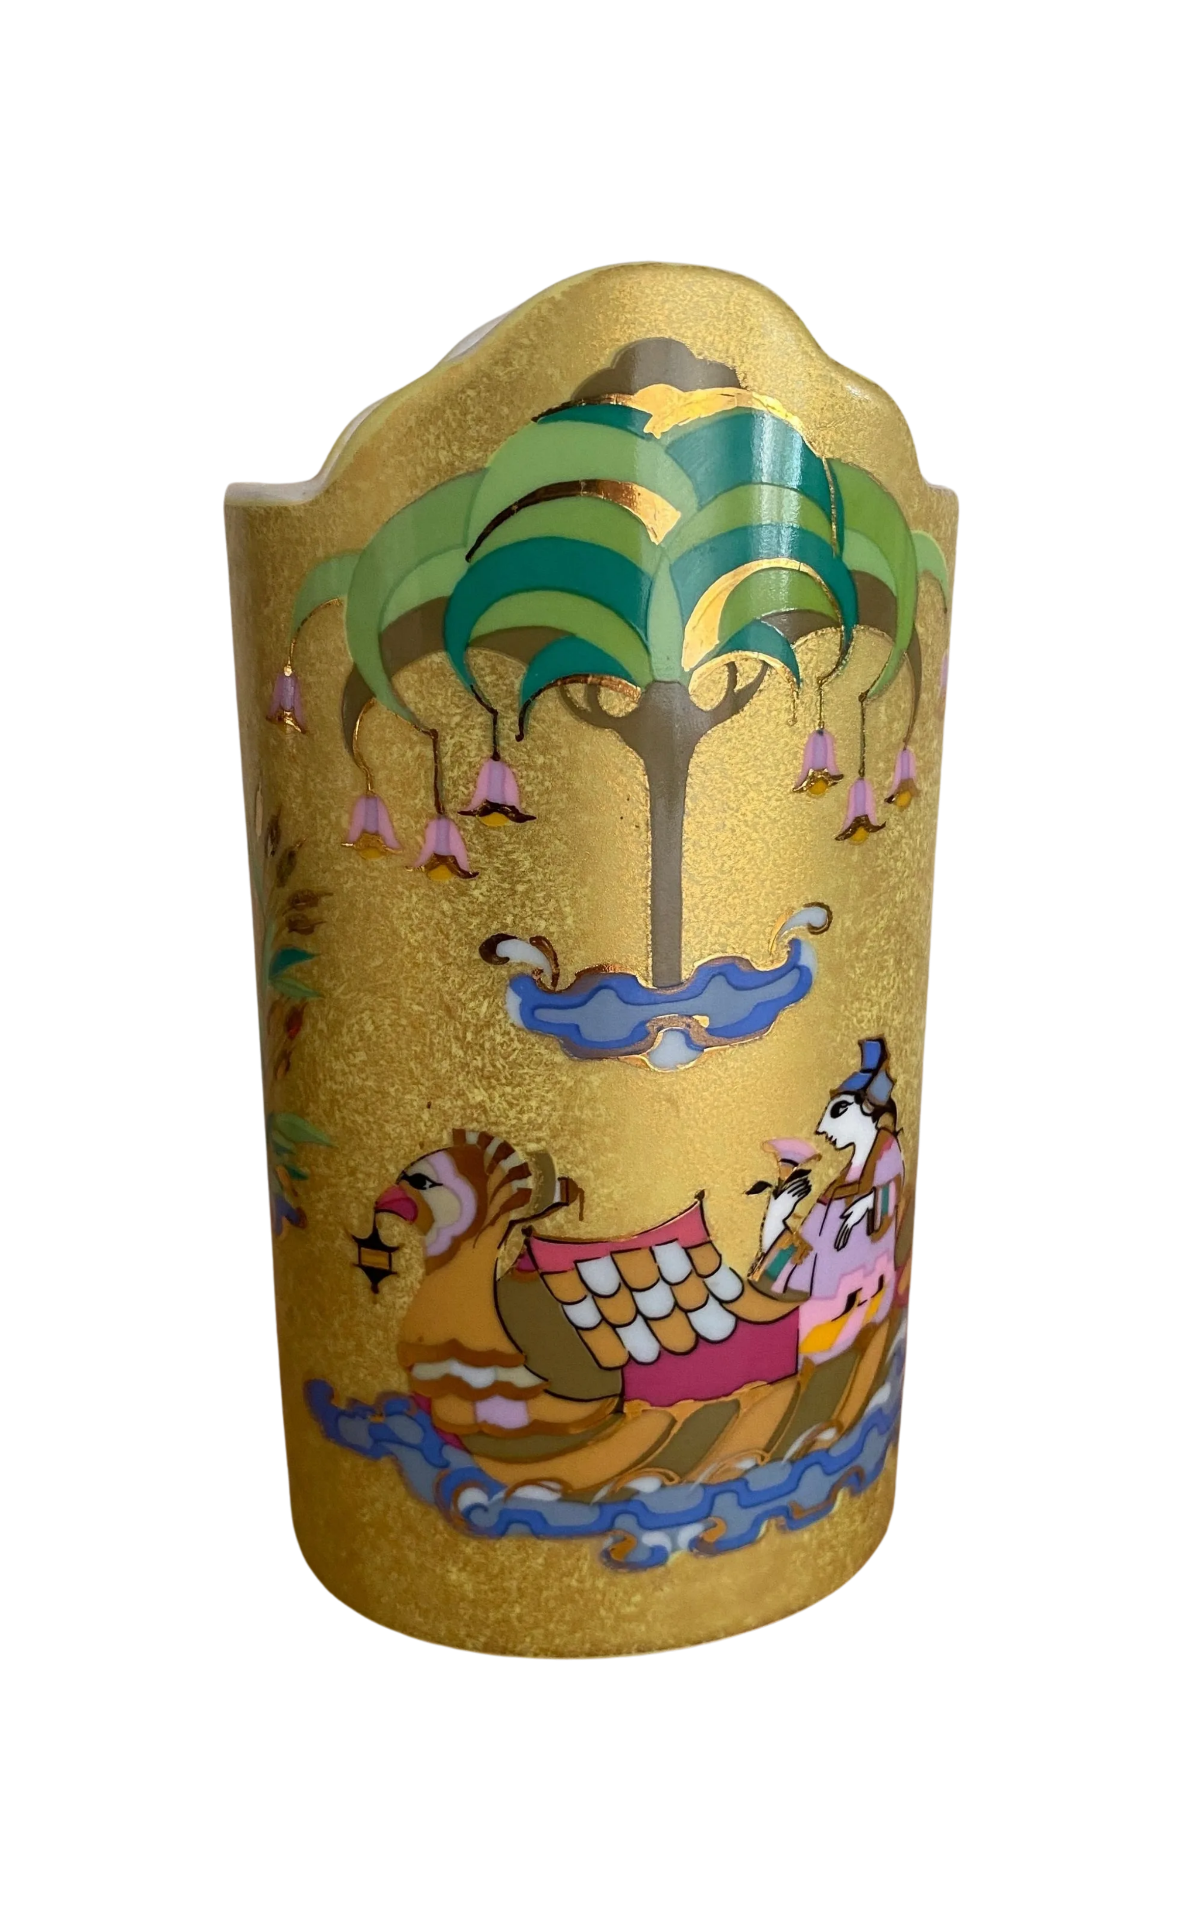 A 1970S ROSENTHAL BJORN WIINBLAD GOLD VASE WITH FIGURES IN BOAT DESIGN, SIGNED, HEIGHT 17 CM